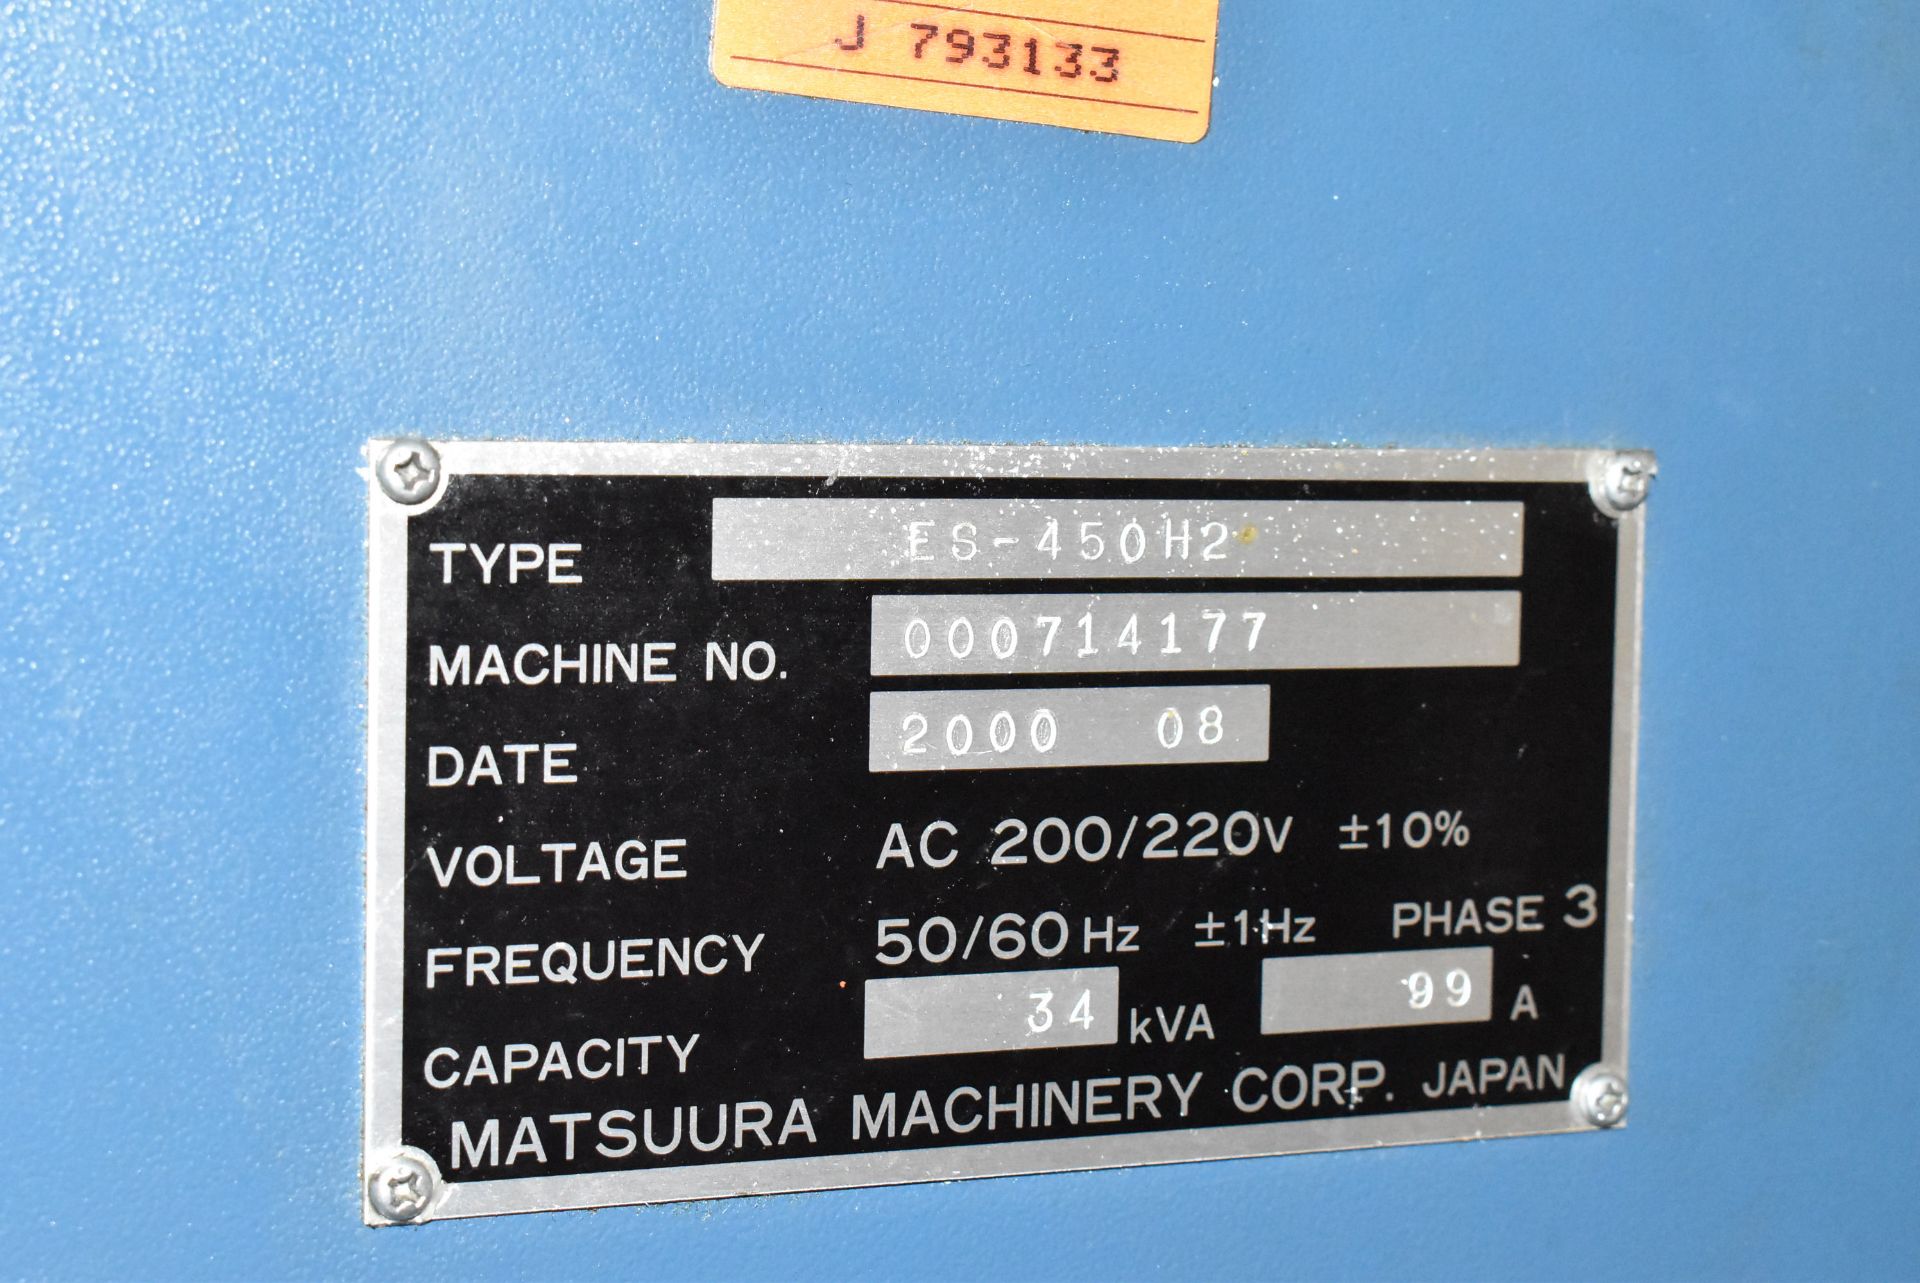 MATSUURA (2000) ES 450 H2 TWIN-PALLET HIGH-SPEED CNC HORIZONTAL MACHINING CENTER WITH FANUC SERIES - Image 12 of 13